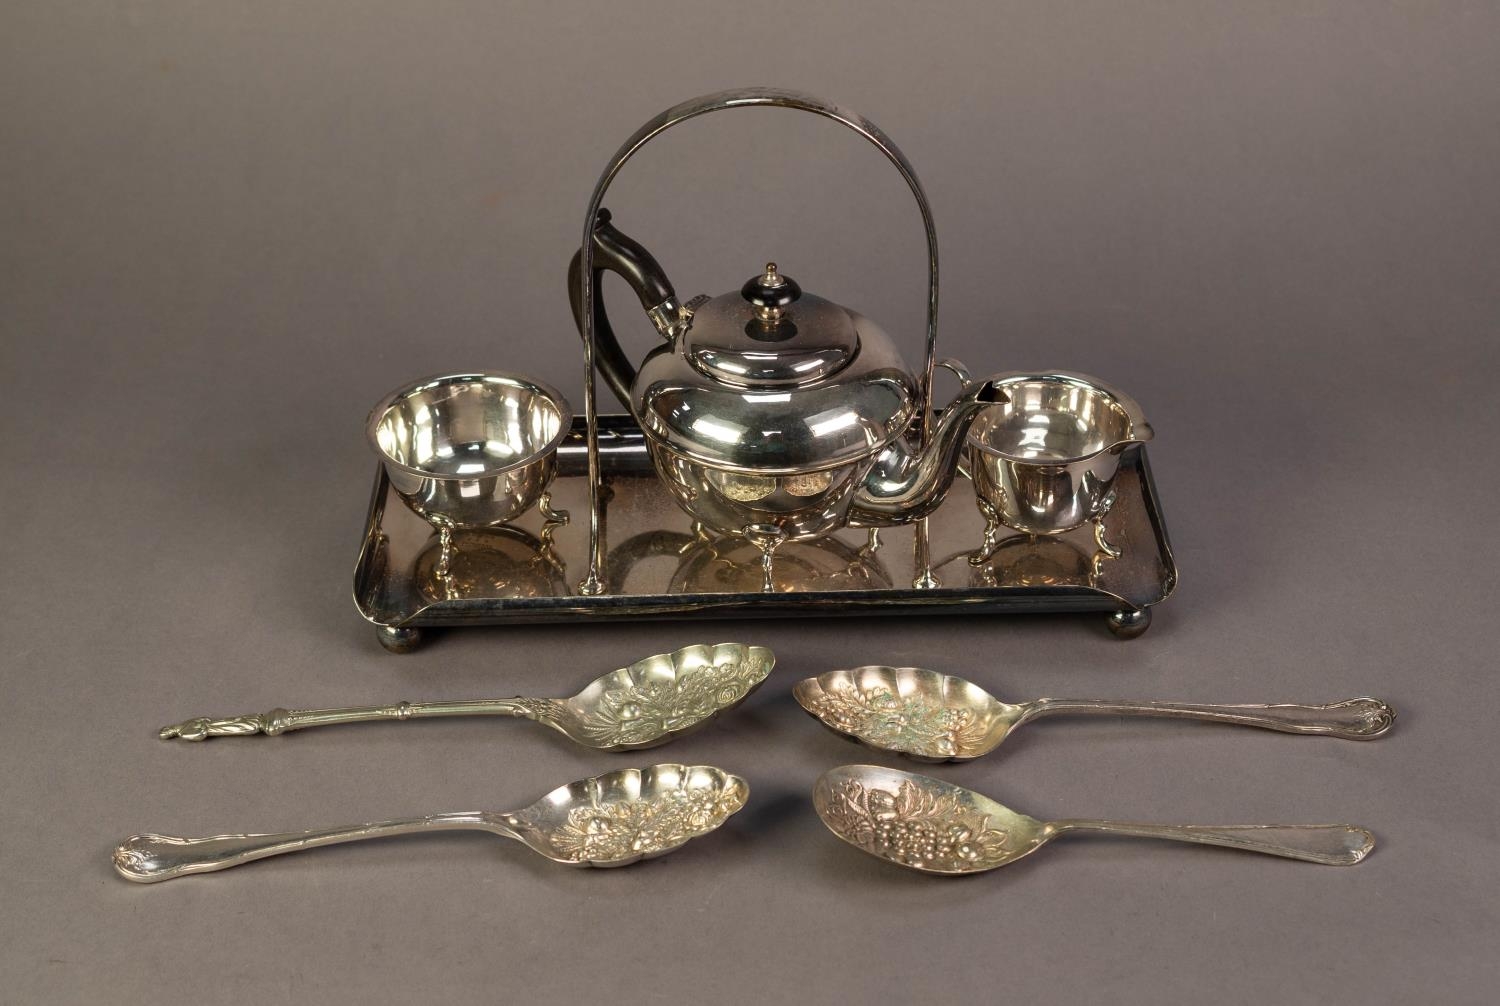 PRE-WAR ELECTROPLATED THREE PIECE TEASET, on oblong stand with fixed carrying handle; a pair of